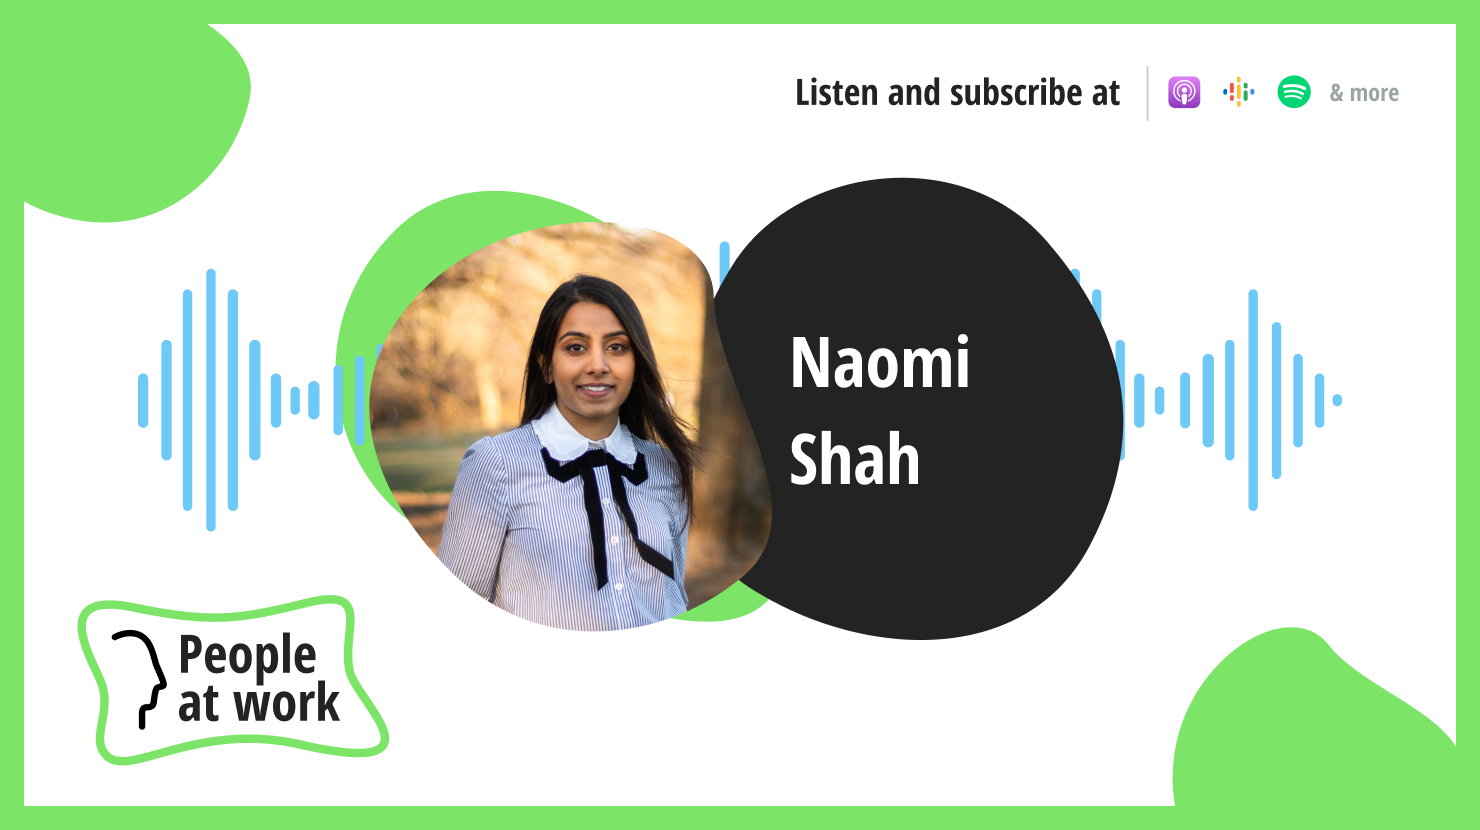 The human story is the heart of workplace culture feat. Naomi Shah